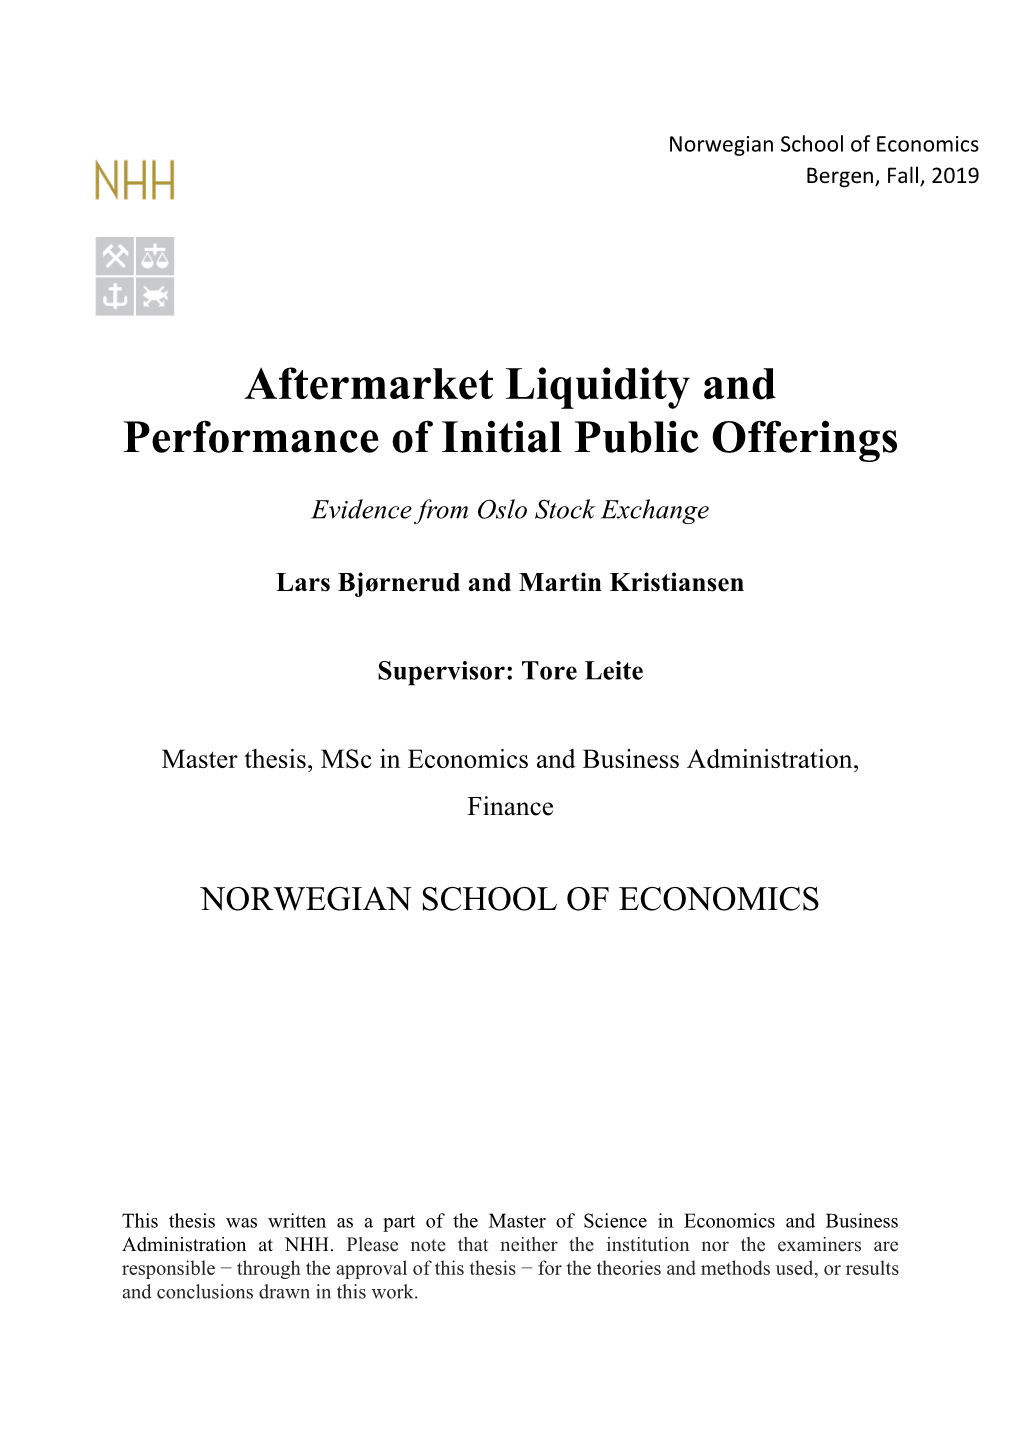 Aftermarket Liquidity and Performance of Initial Public Offerings